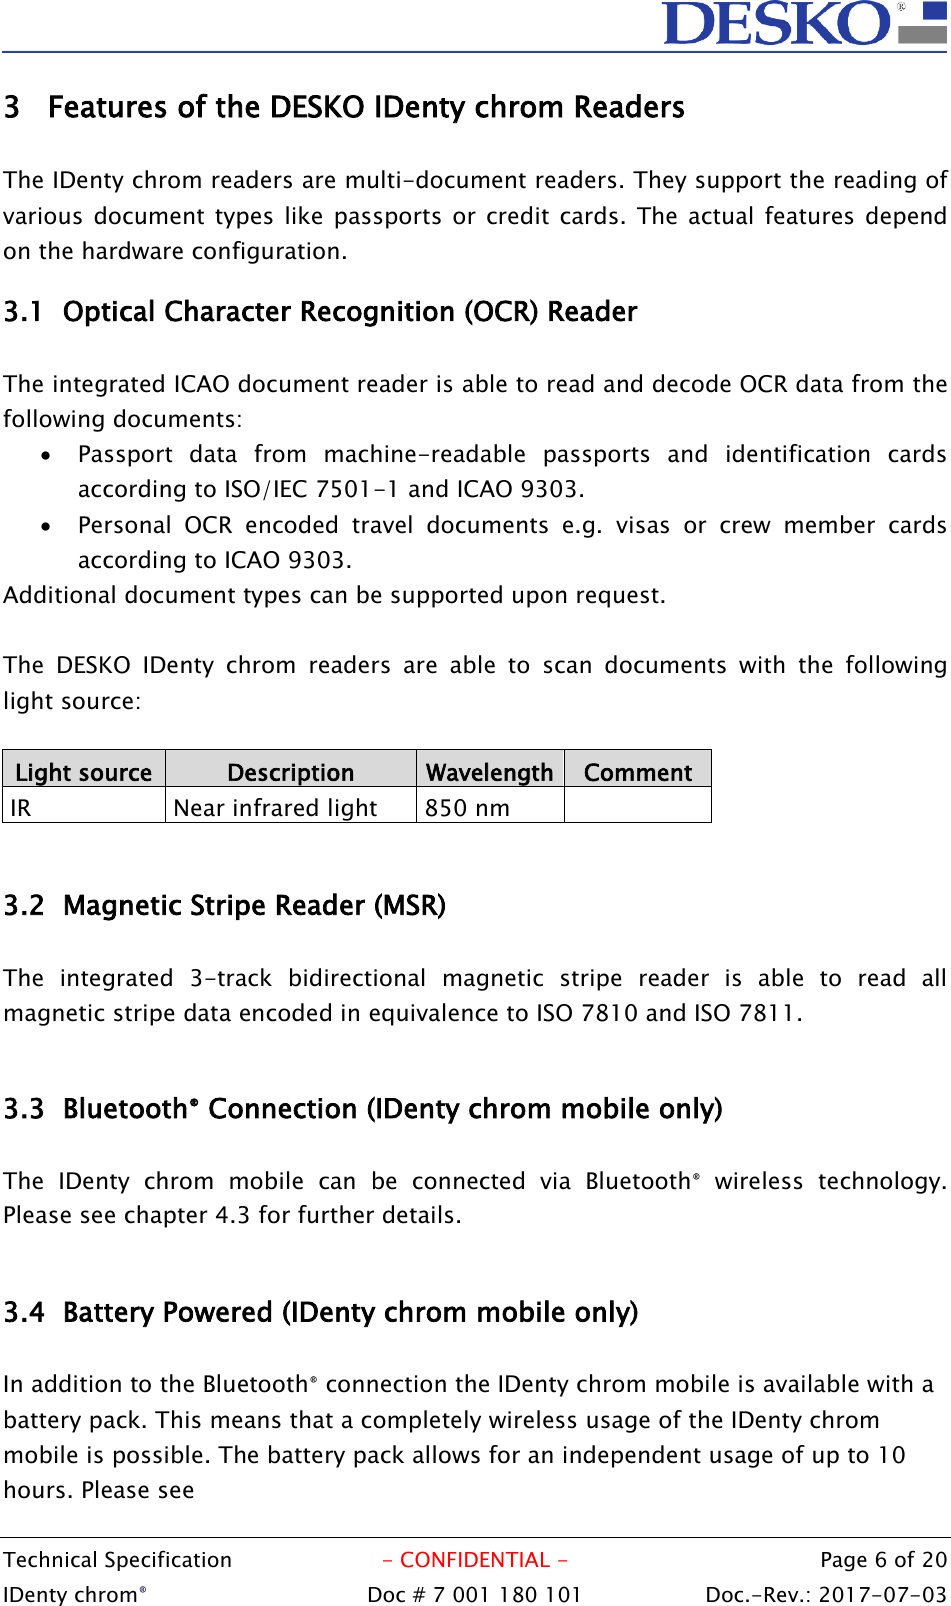  Technical Specification  - CONFIDENTIAL -  Page 6 of 20 IDenty chrom®  Doc # 7 001 180 101   Doc.-Rev.: 2017-07-03   3 Features of the DESKO IDenty chrom Readers  The IDenty chrom readers are multi-document readers. They support the reading of various document types like  passports or  credit cards.  The actual  features depend on the hardware configuration. 3.1 Optical Character Recognition (OCR) Reader  The integrated ICAO document reader is able to read and decode OCR data from the following documents:  Passport  data  from  machine-readable  passports  and  identification  cards according to ISO/IEC 7501-1 and ICAO 9303.  Personal  OCR  encoded  travel  documents  e.g.  visas  or  crew  member  cards according to ICAO 9303. Additional document types can be supported upon request.  The  DESKO  IDenty  chrom  readers  are  able  to  scan  documents  with  the  following light source:  Light source Description Wavelength Comment  IR  Near infrared light  850 nm   3.2 Magnetic Stripe Reader (MSR)  The  integrated  3-track  bidirectional  magnetic  stripe  reader  is  able  to  read  all magnetic stripe data encoded in equivalence to ISO 7810 and ISO 7811.  3.3 Bluetooth® Connection (IDenty chrom mobile only)  The  IDenty  chrom  mobile  can  be  connected  via  Bluetooth®  wireless  technology. Please see chapter 4.3 for further details.   3.4 Battery Powered (IDenty chrom mobile only)  In addition to the Bluetooth® connection the IDenty chrom mobile is available with a battery pack. This means that a completely wireless usage of the IDenty chrom mobile is possible. The battery pack allows for an independent usage of up to 10 hours. Please see    